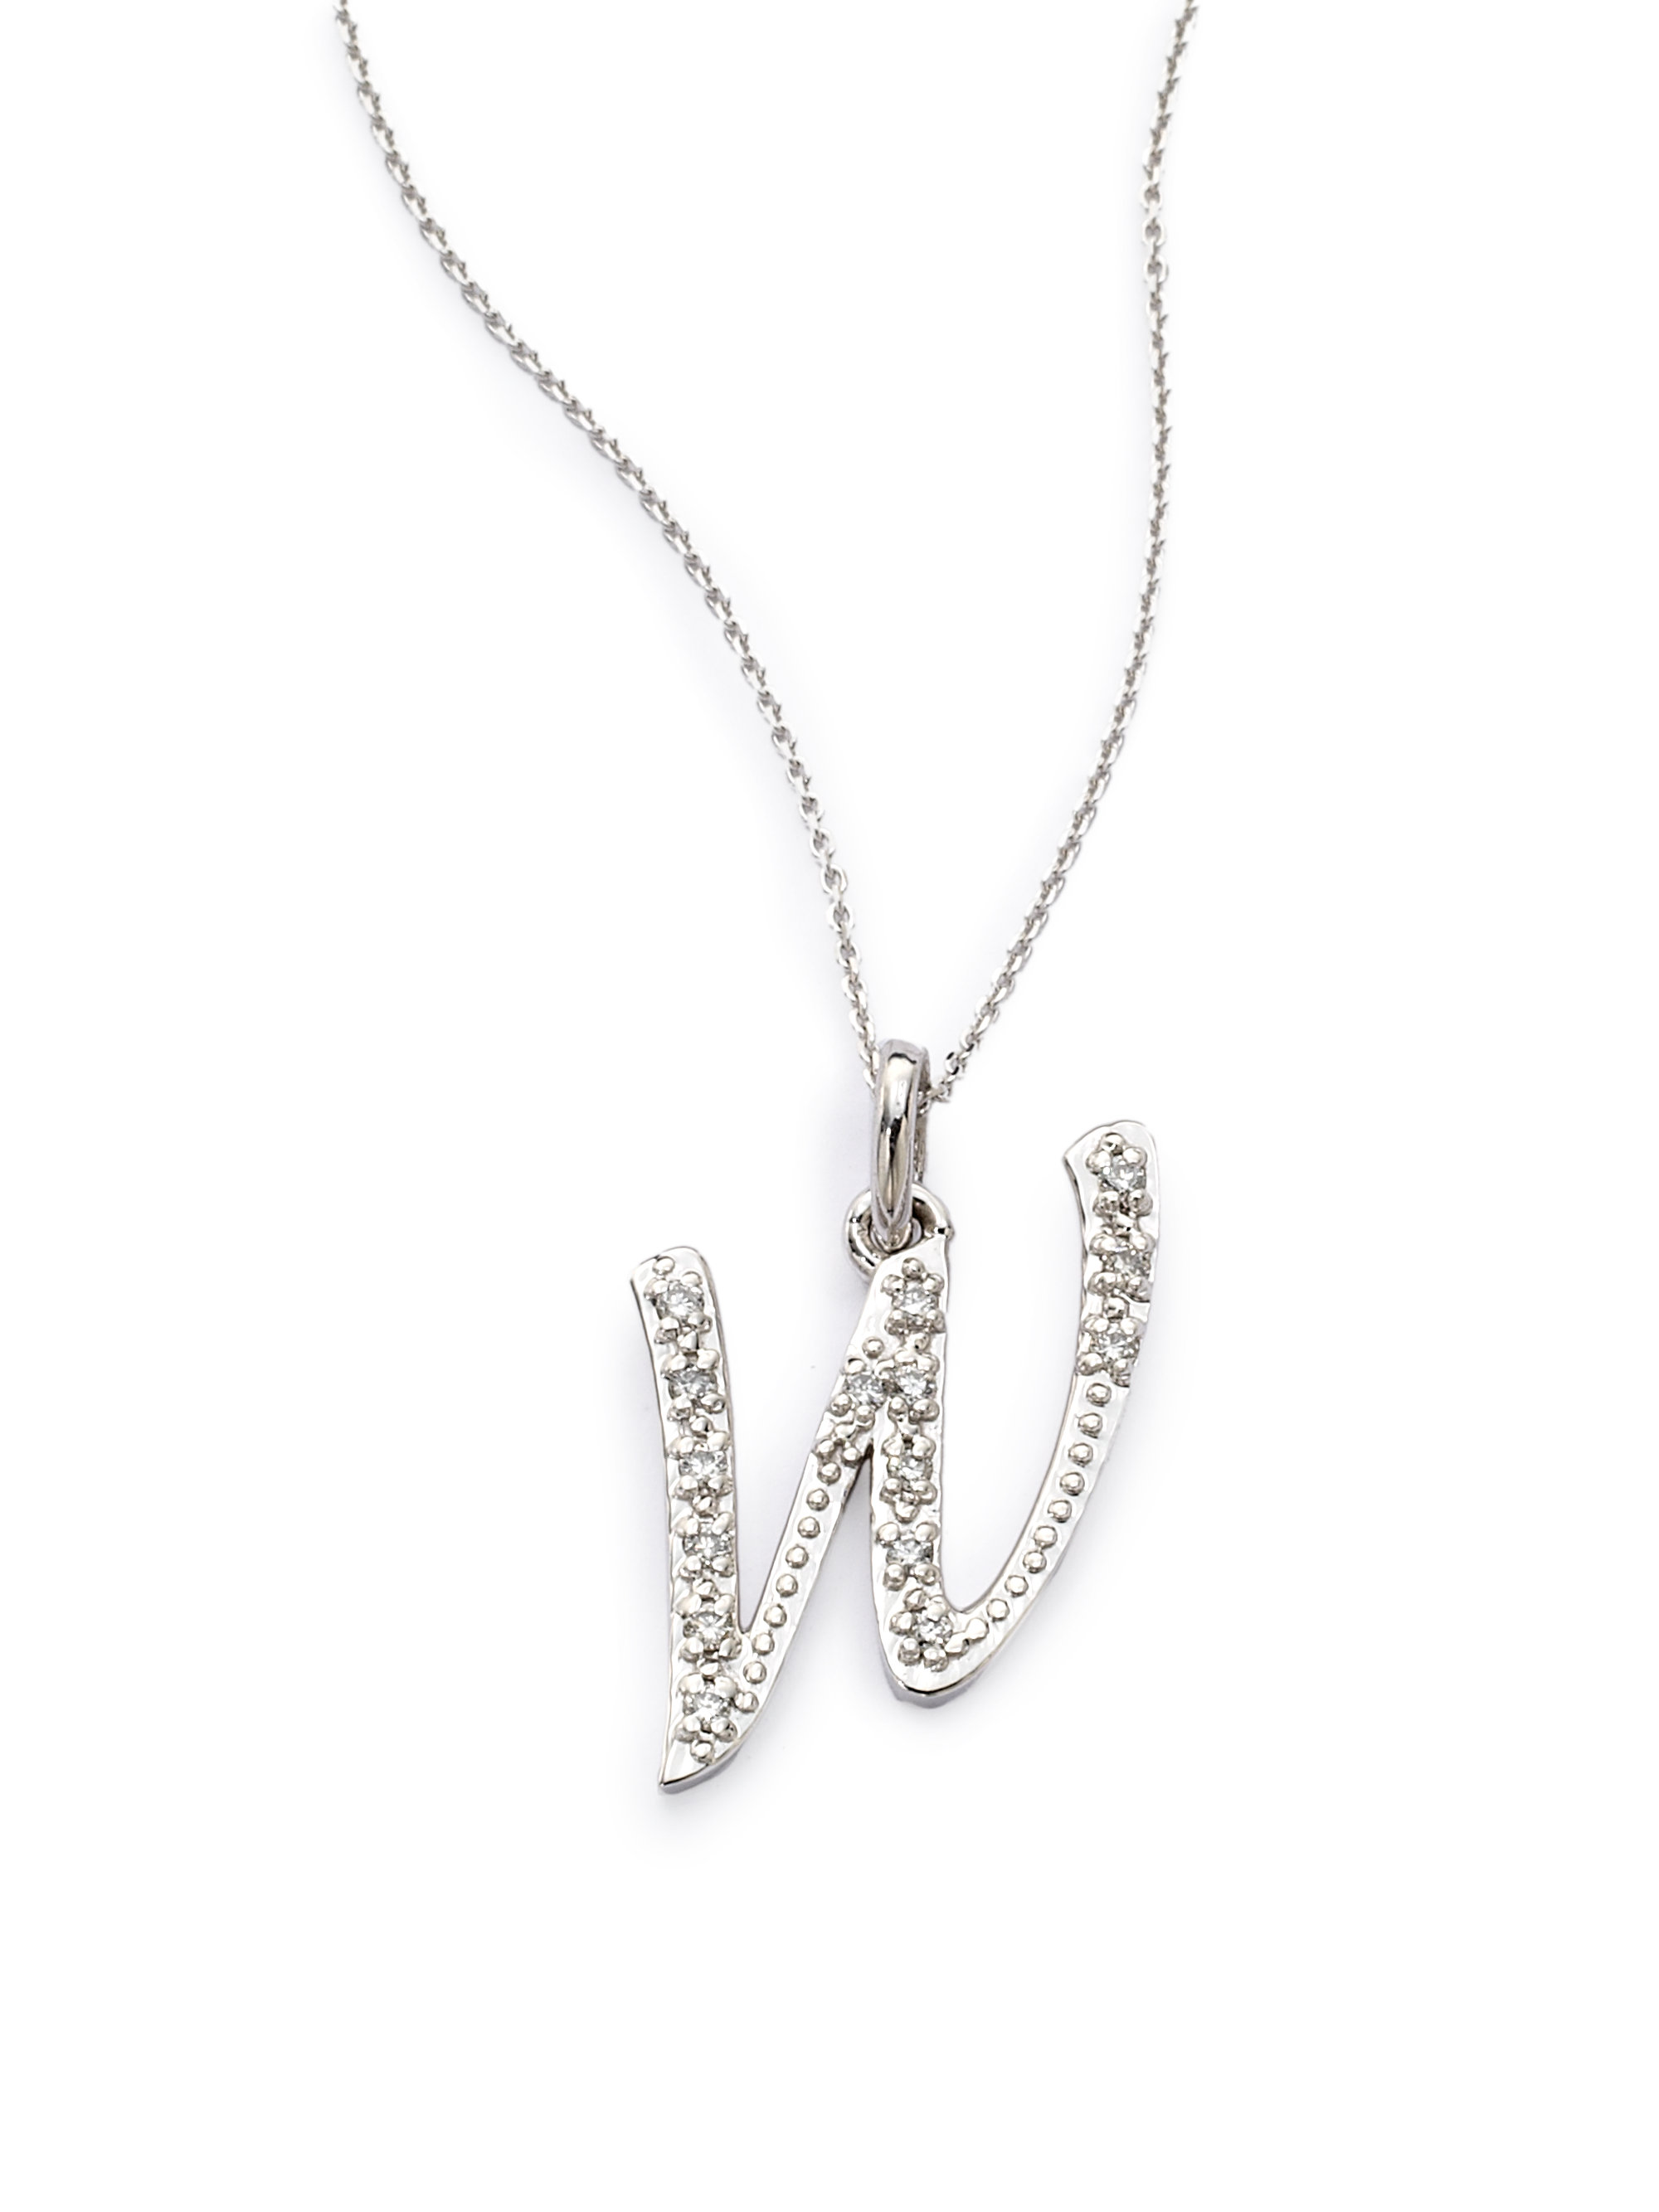 Kc Designs White Gold and Diamond Initial Necklace in White